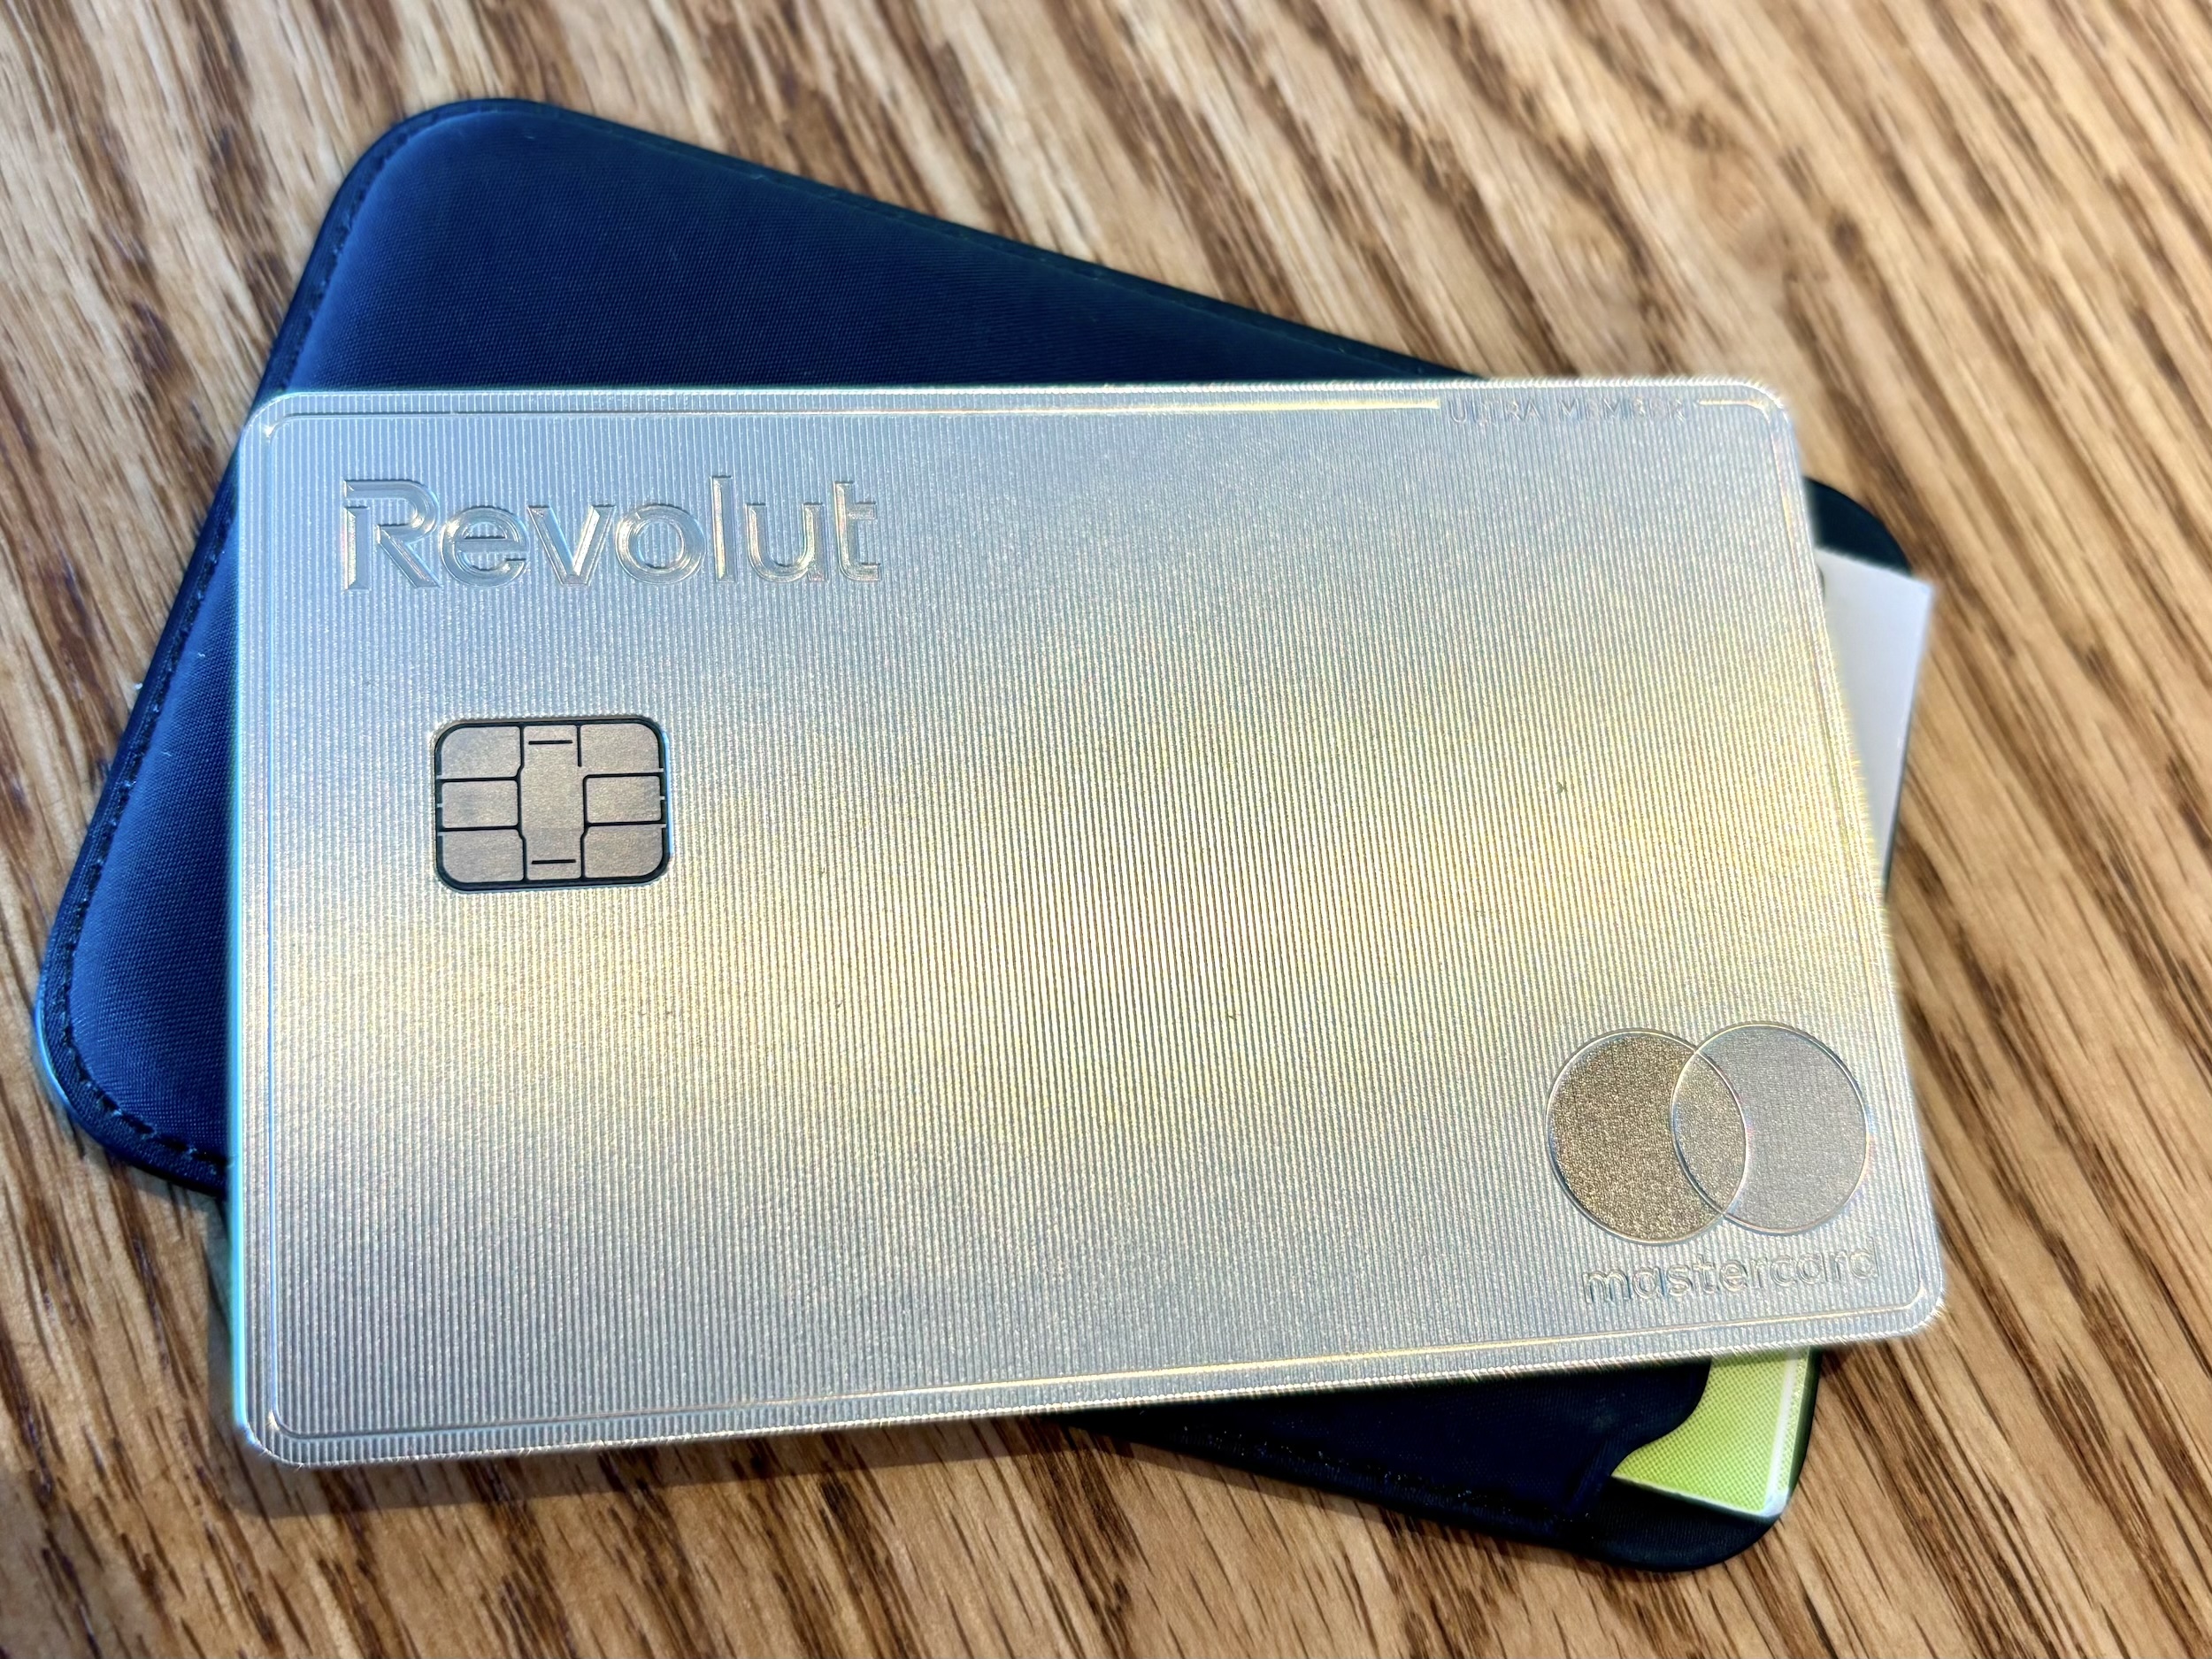 Revolut Bank Secures License For Mexico Operations As Digital Finance Expand